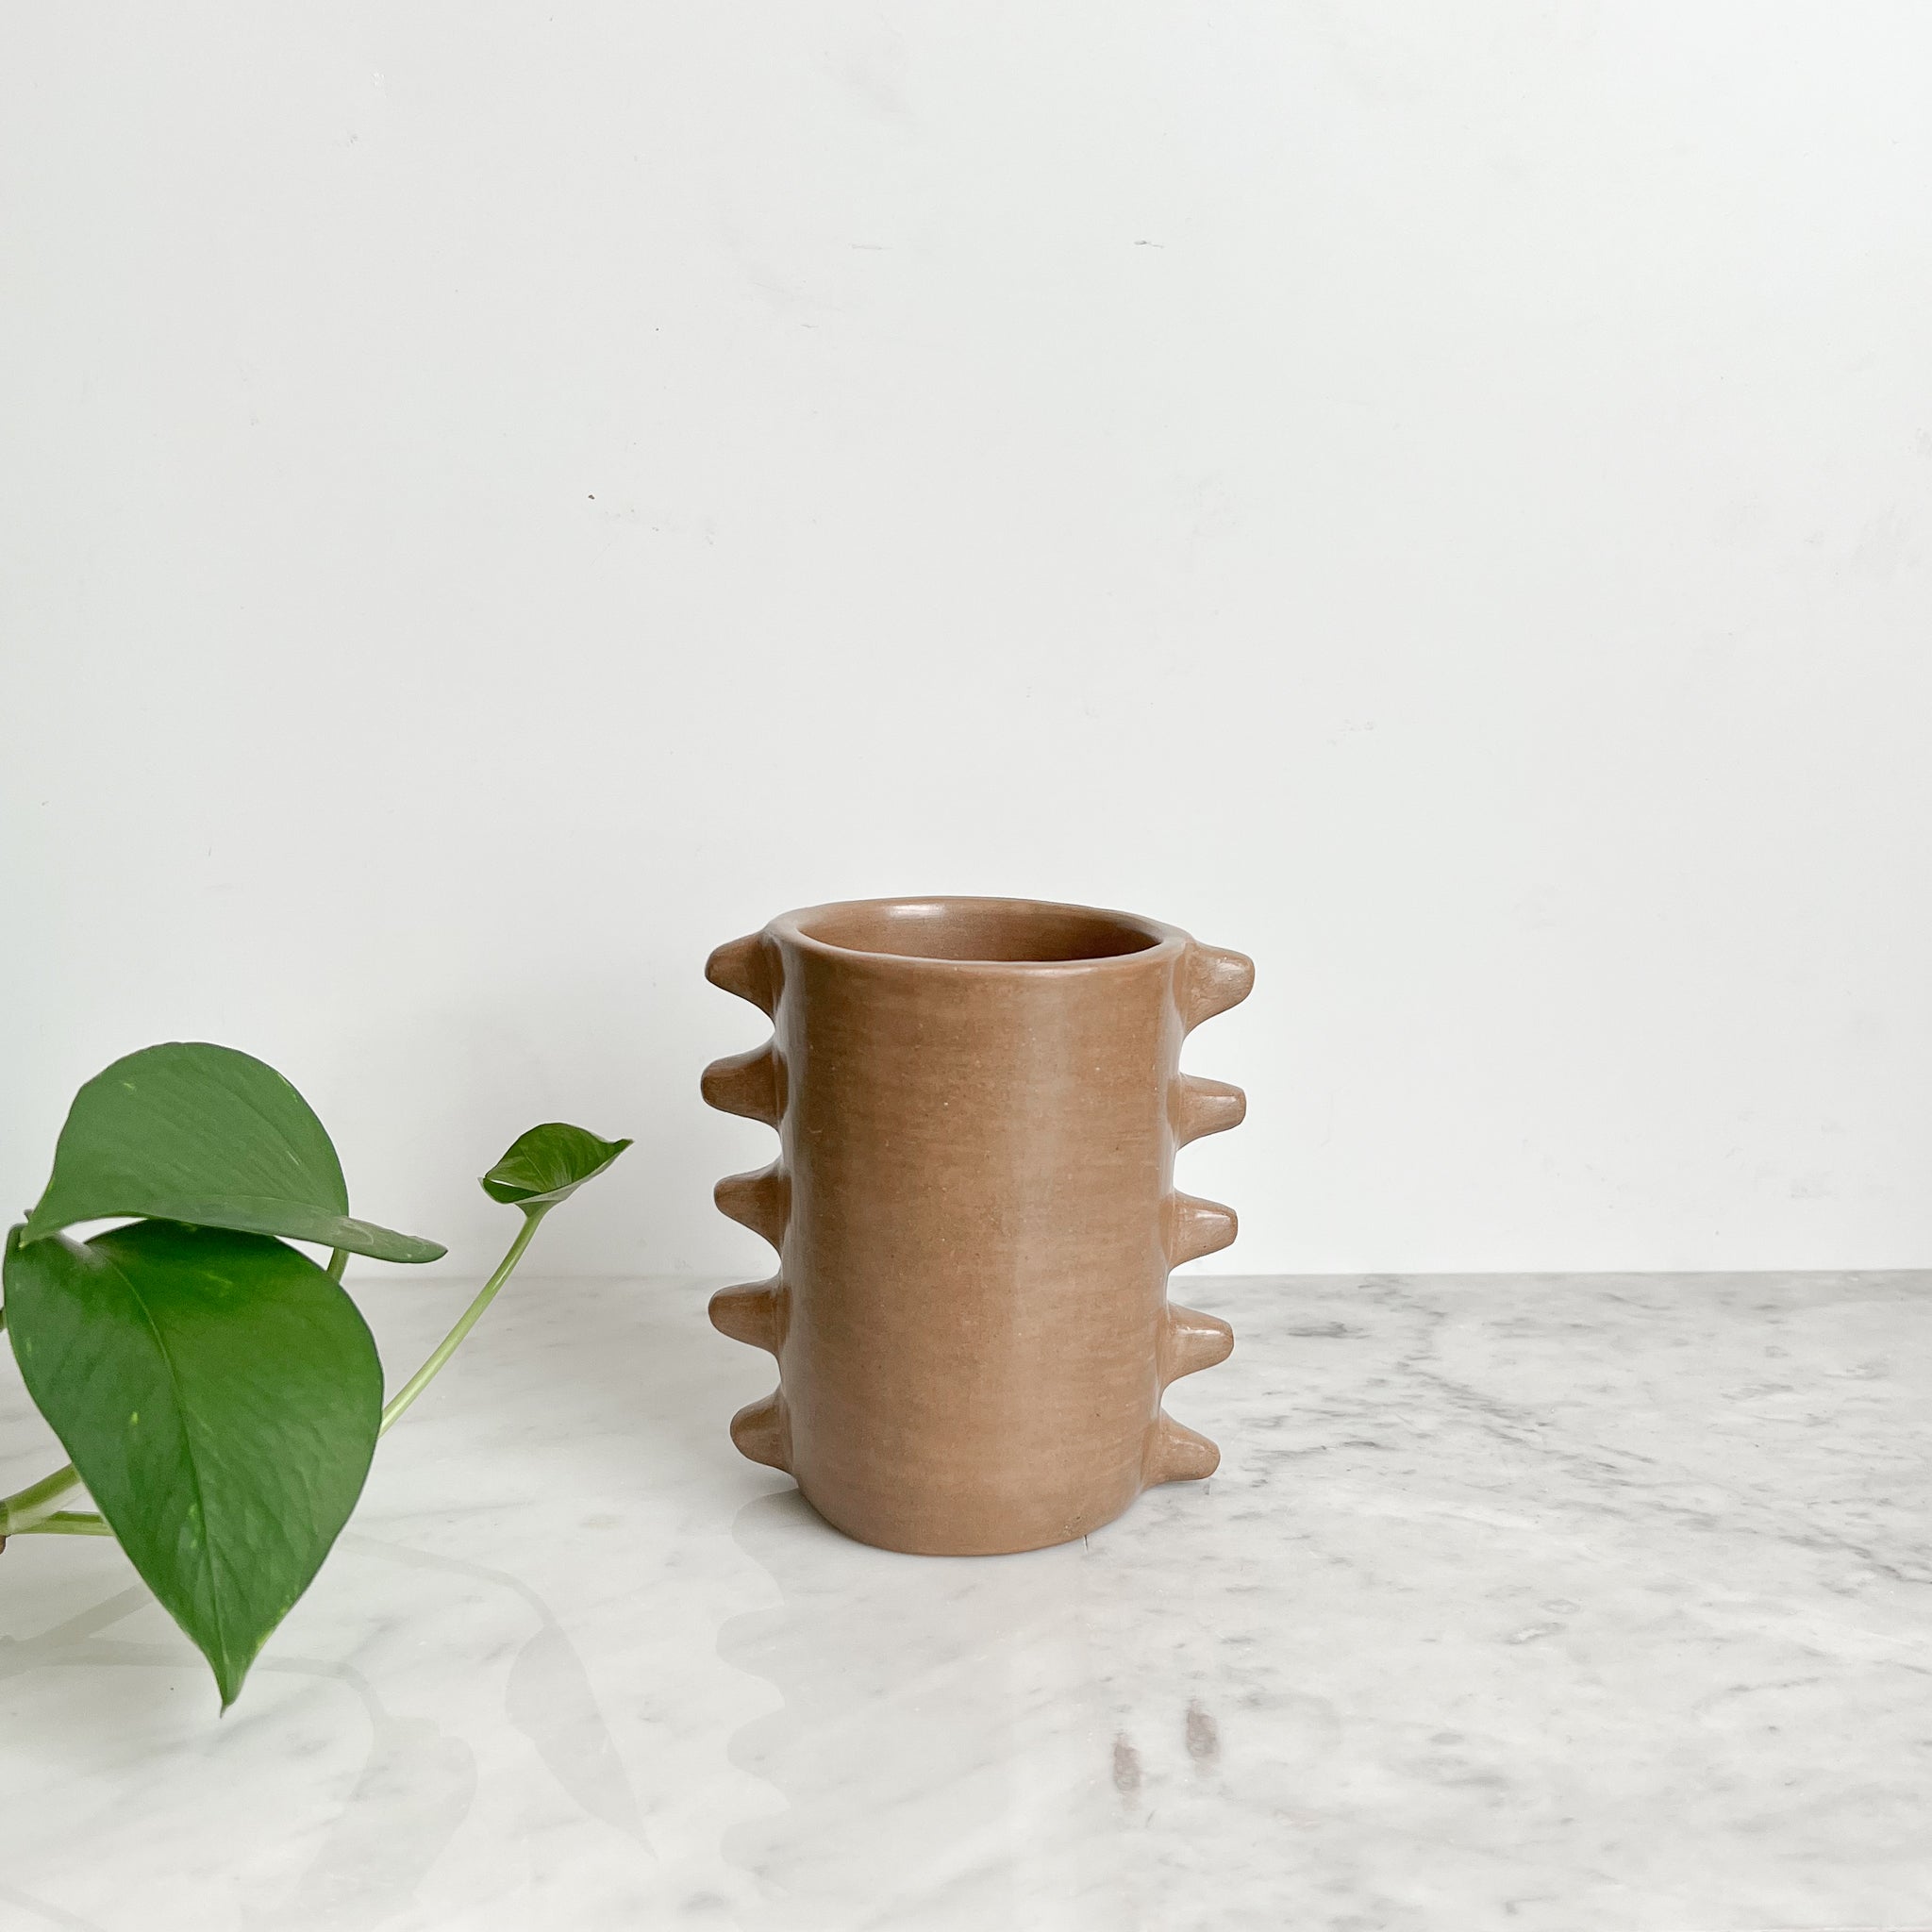 A spiky clay mug made in Mexico on a white marble counter.